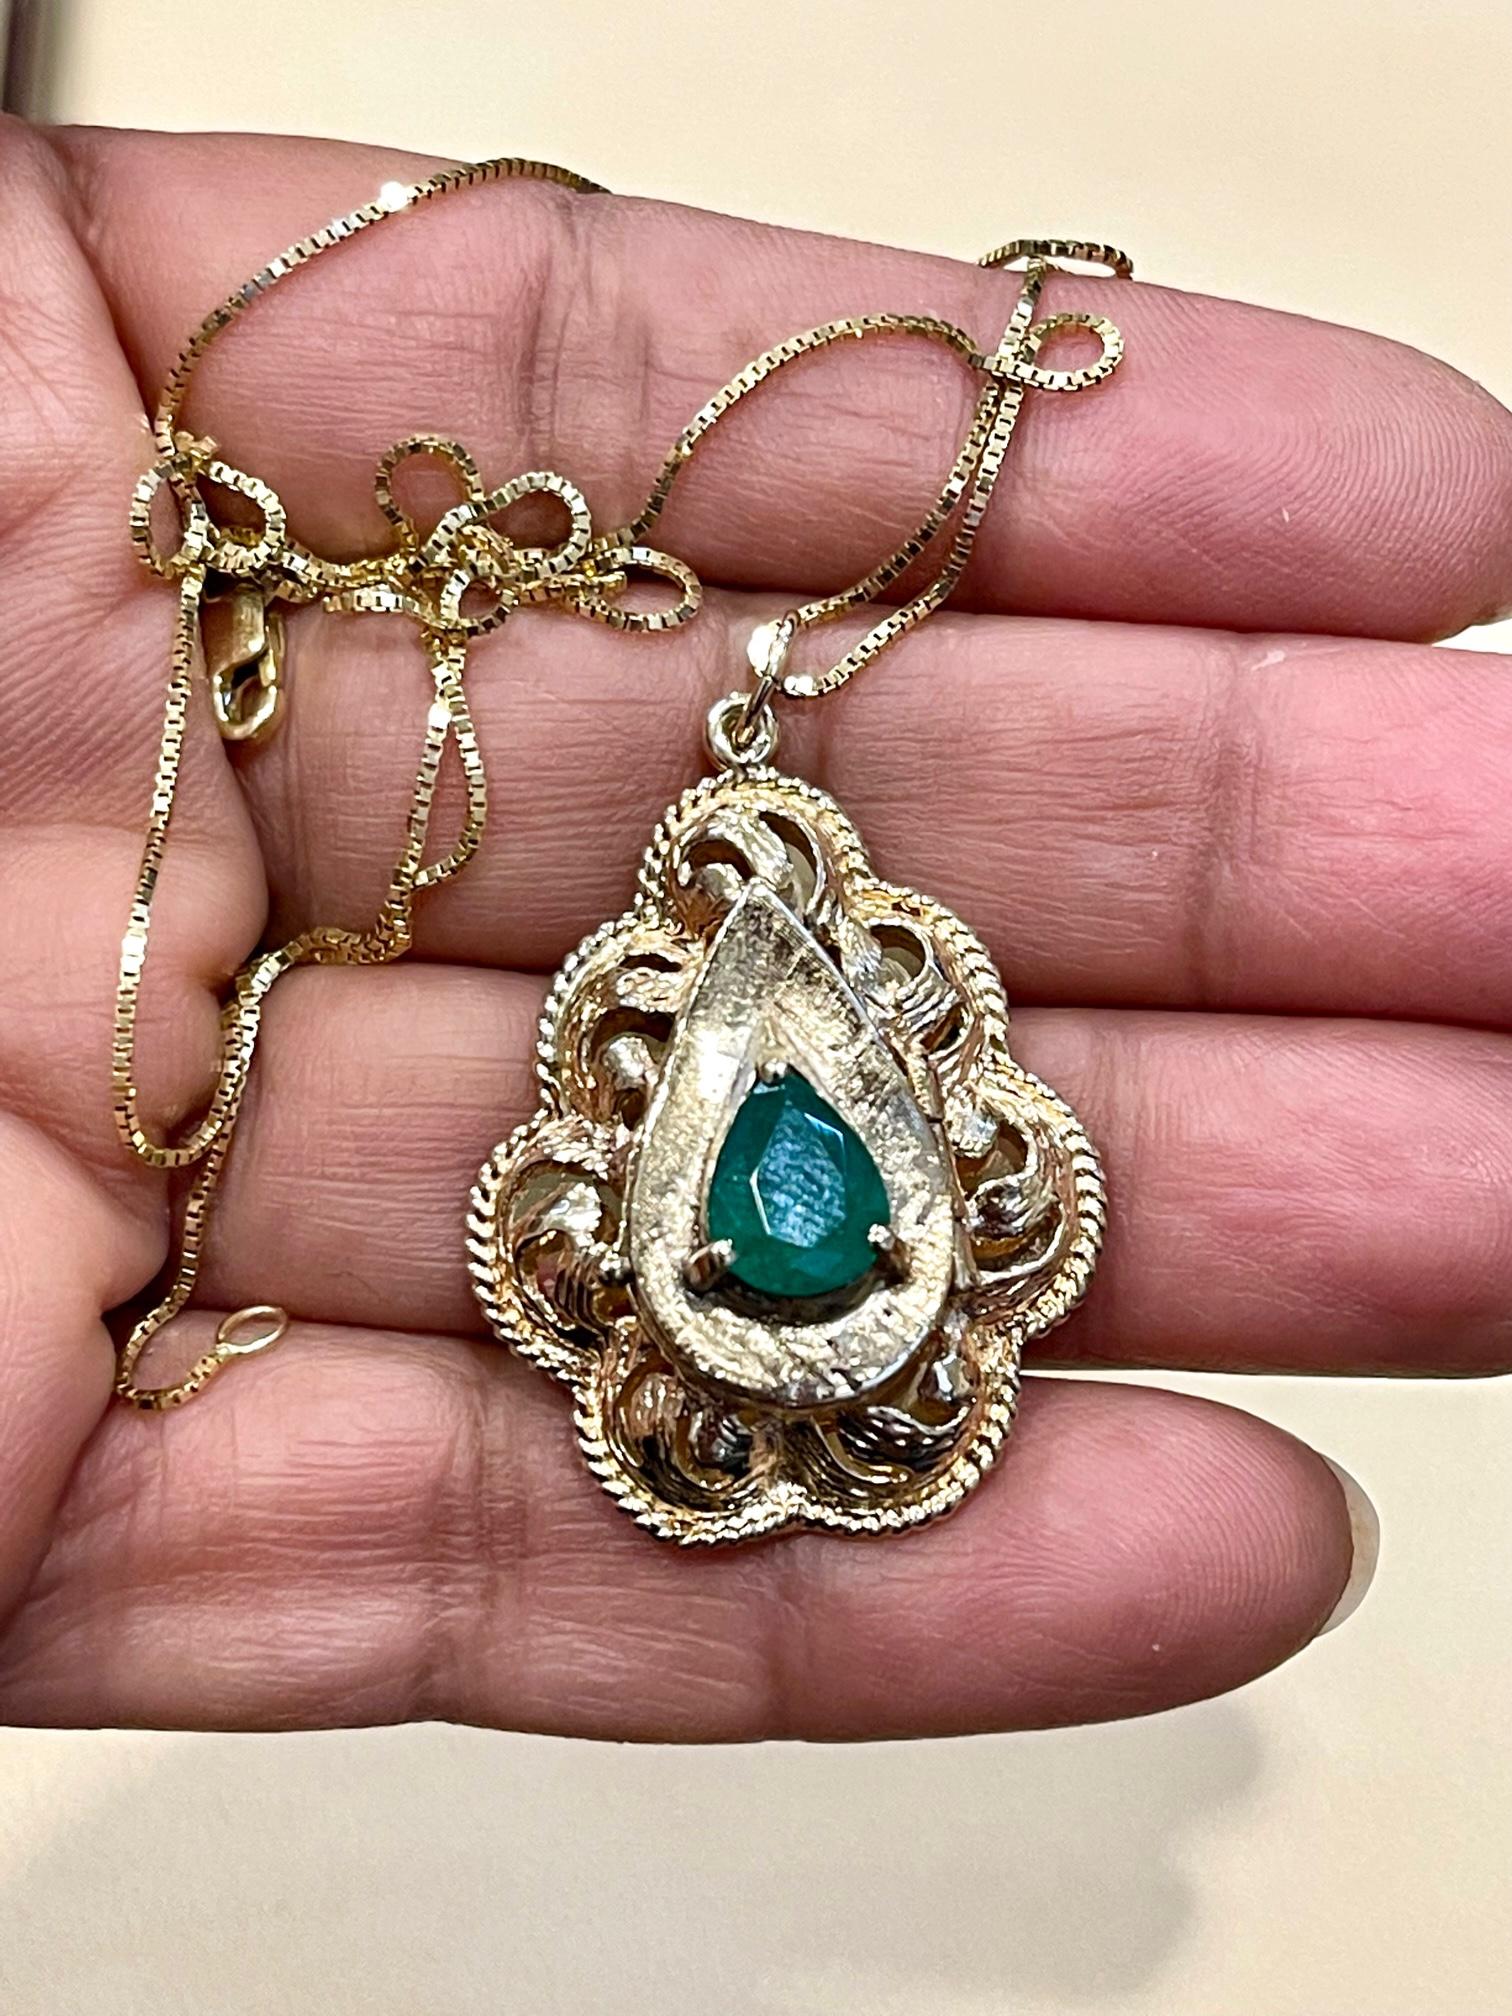 Vintage 14 Karat Yellow Gold 10.5 Gm Chain with Locket and Natural Emerald For Sale 9